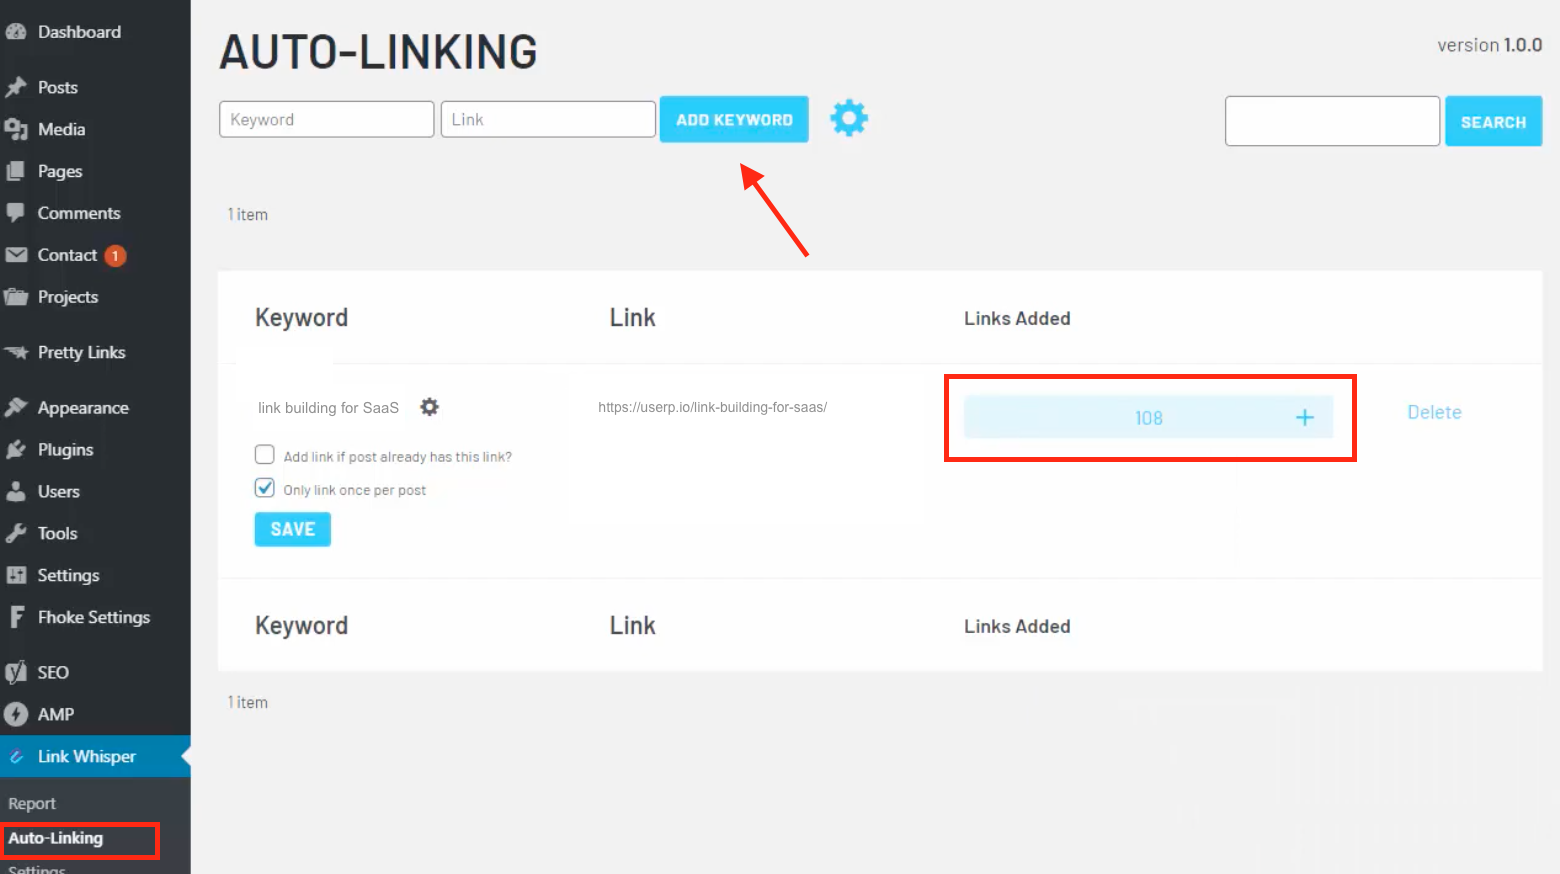 The auto-linking feature creates internal links for unique keyword and URL combinations